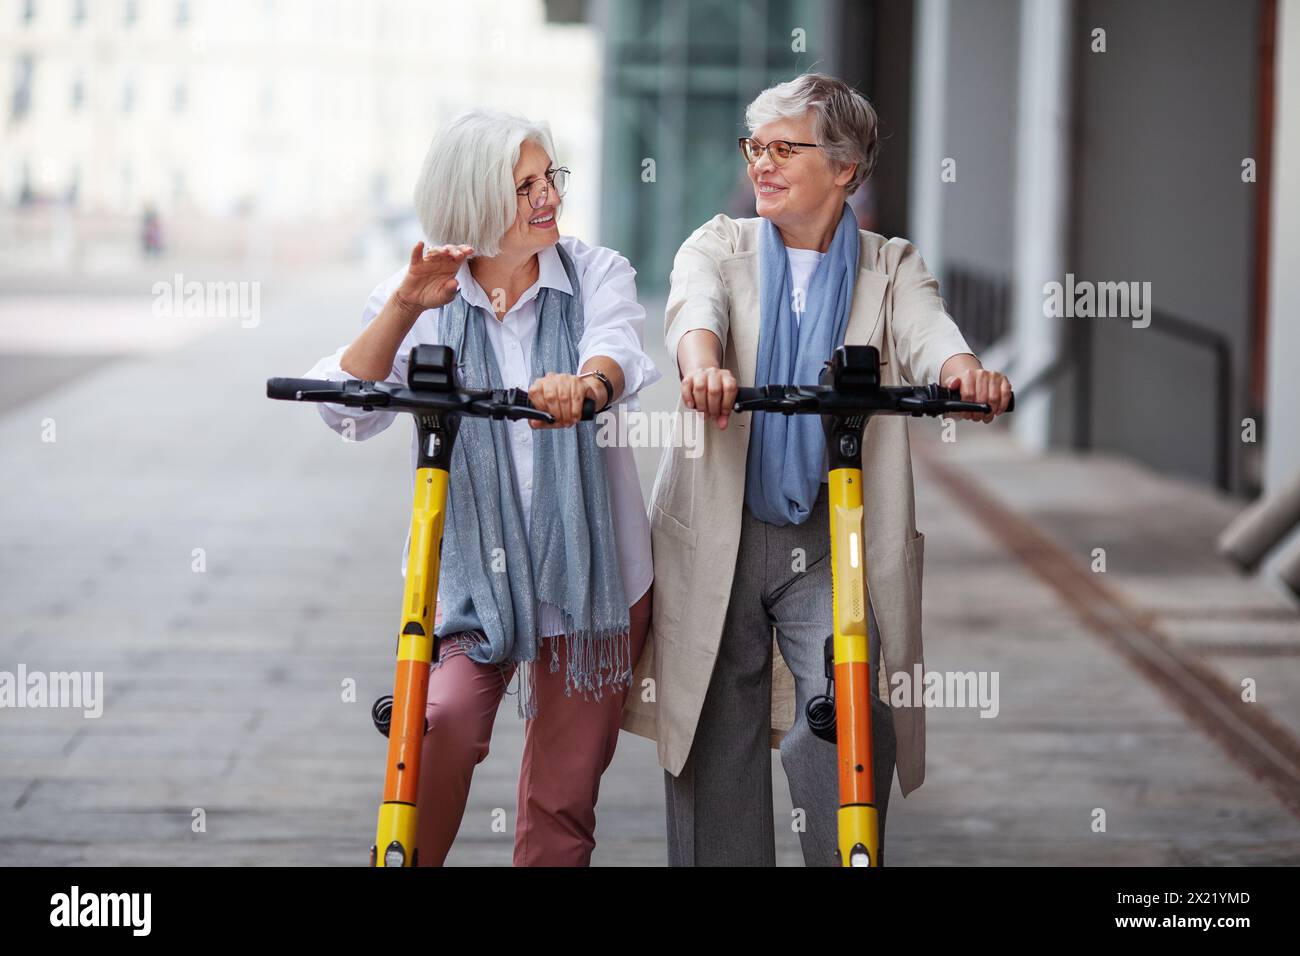 Elderly joyful gray haired women friends ride electric scooters in the city, happy smiling, enjoying a fun time together. Stock Photo